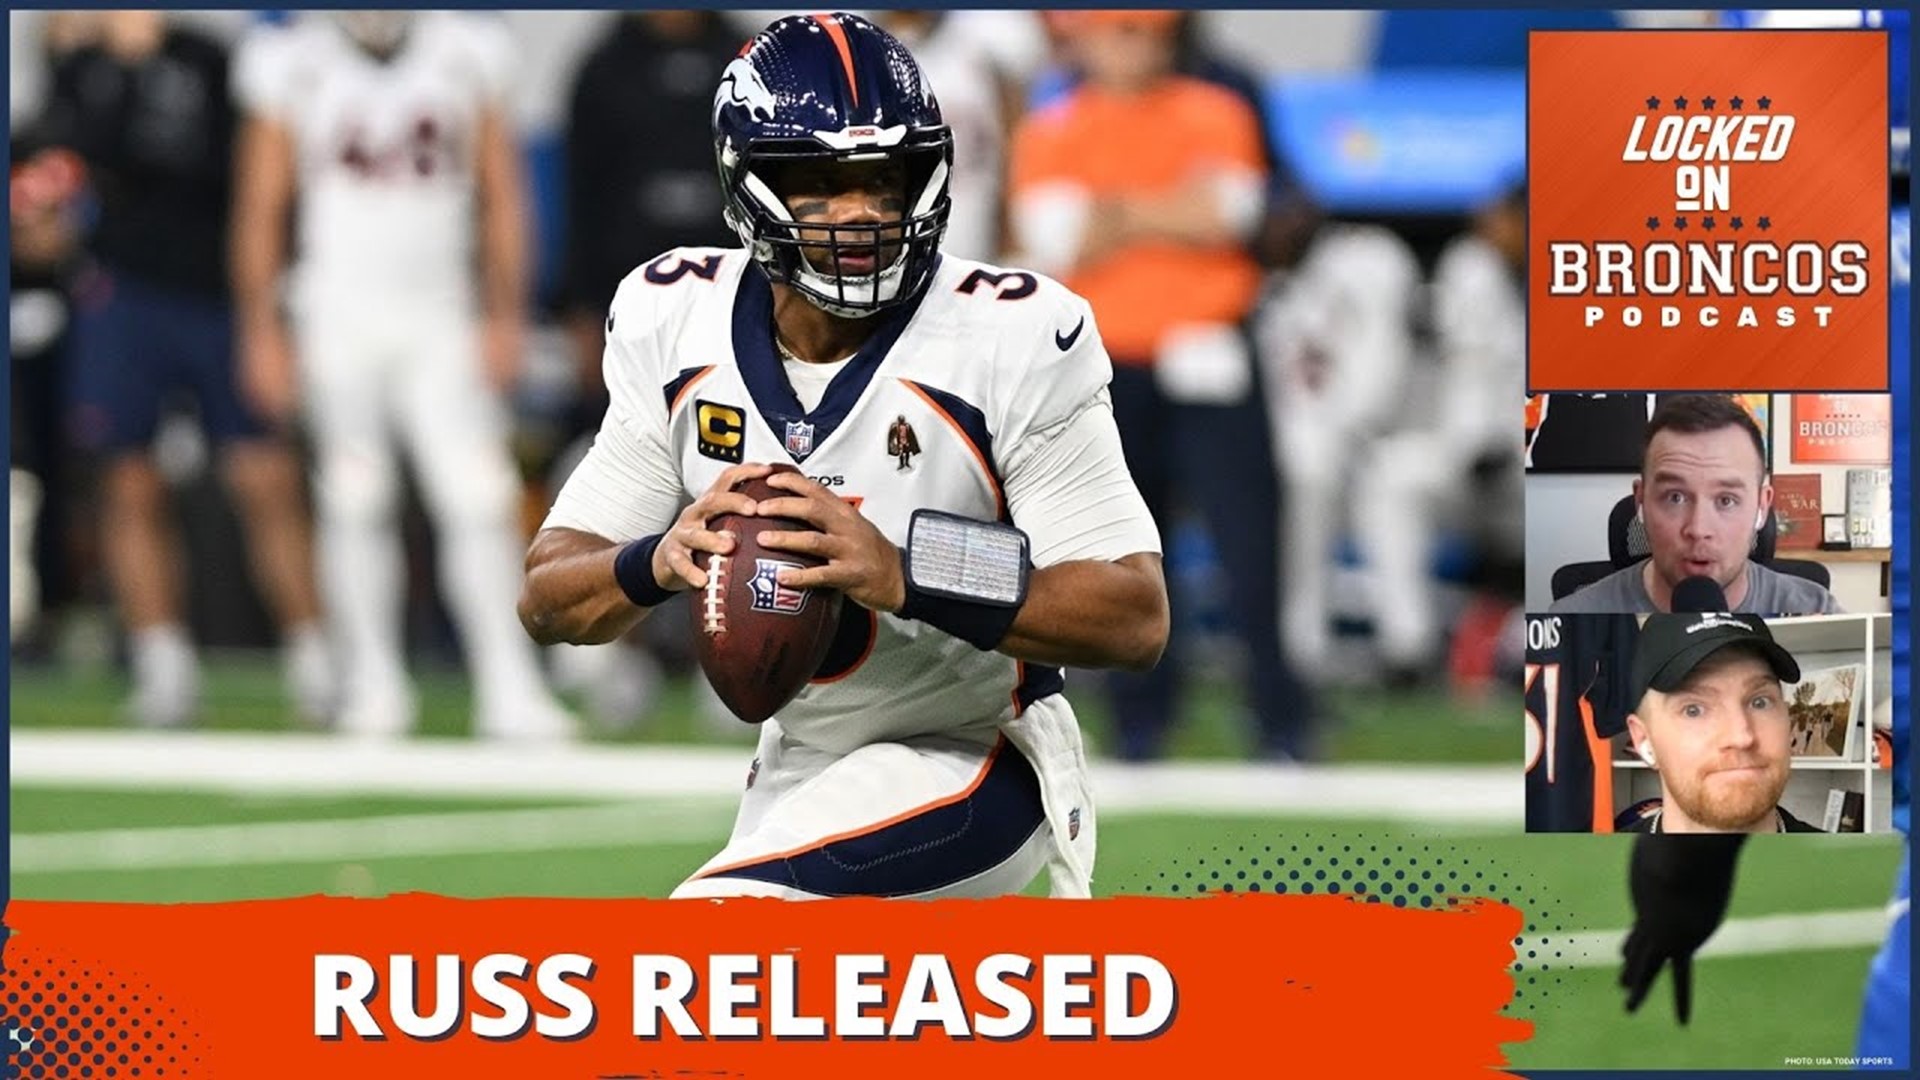 The Denver Broncos have officially released quarterback Russell Wilson, effective March 13th when the new league year goes into effect.